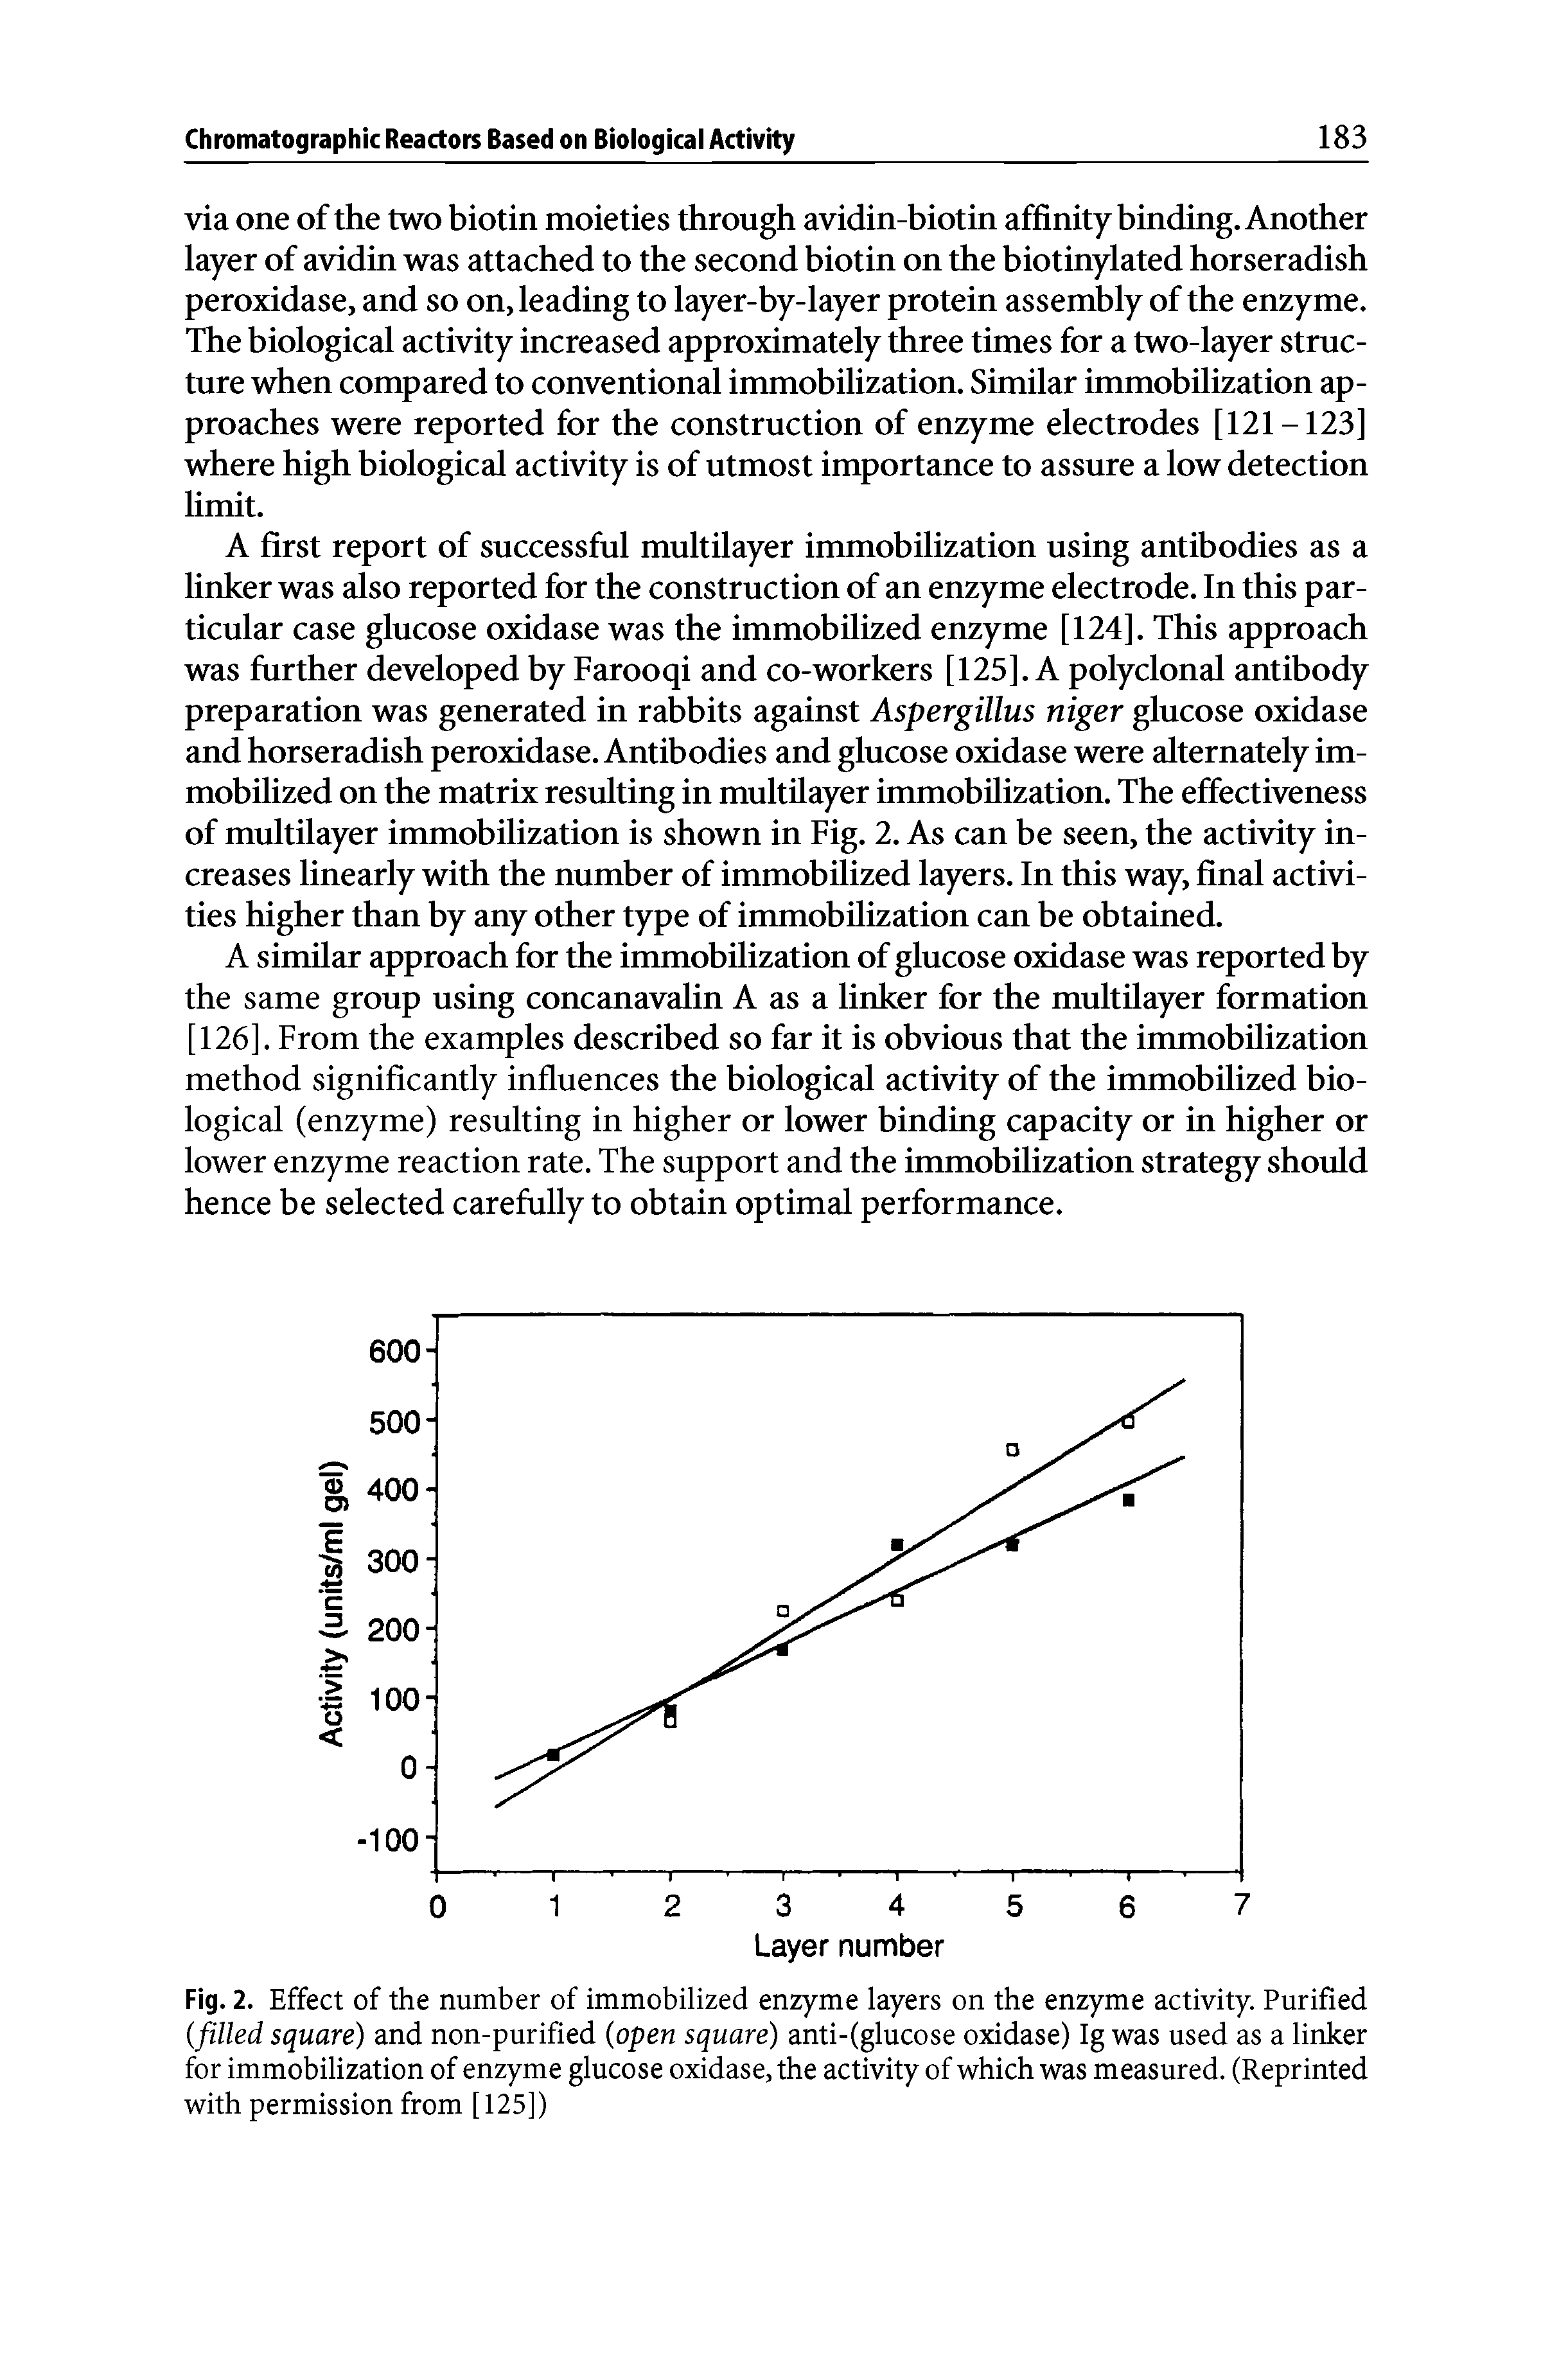 Fig. 2. Effect of the number of immobilized enzyme layers on the enzyme activity. Purified (filled square) and non-purified (open square) anti-(glucose oxidase) Ig was used as a linker for immobilization of enzyme glucose oxidase, the activity of which was measured. (Reprinted with permission from [125])...